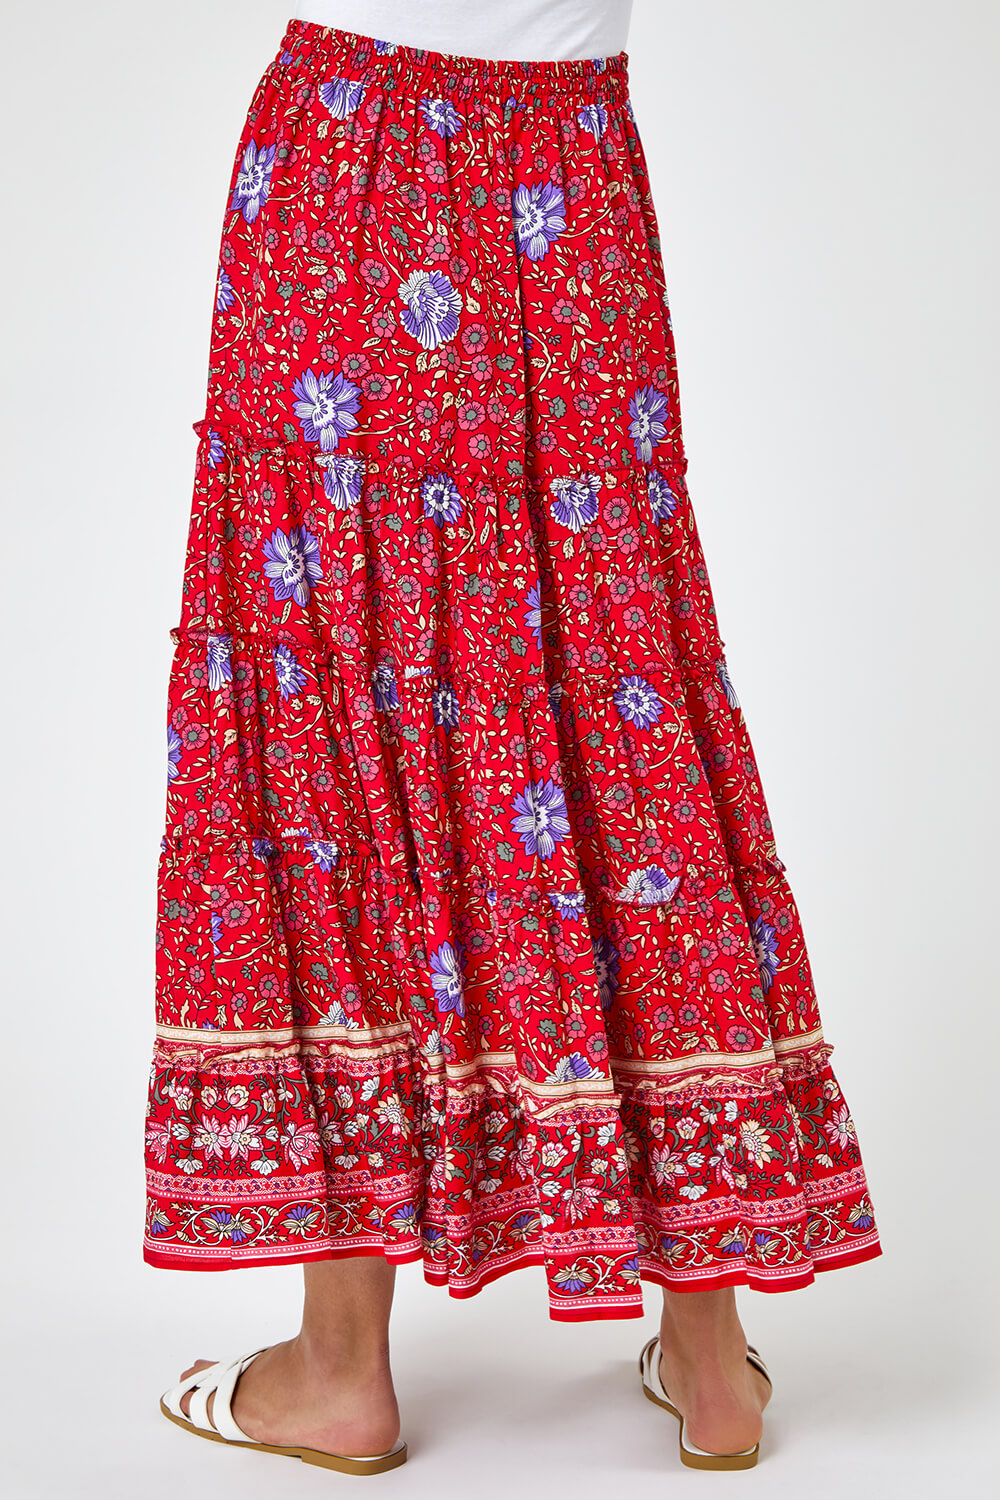 Boho Floral Print Tiered Maxi Skirt in Red - Roman Originals UK